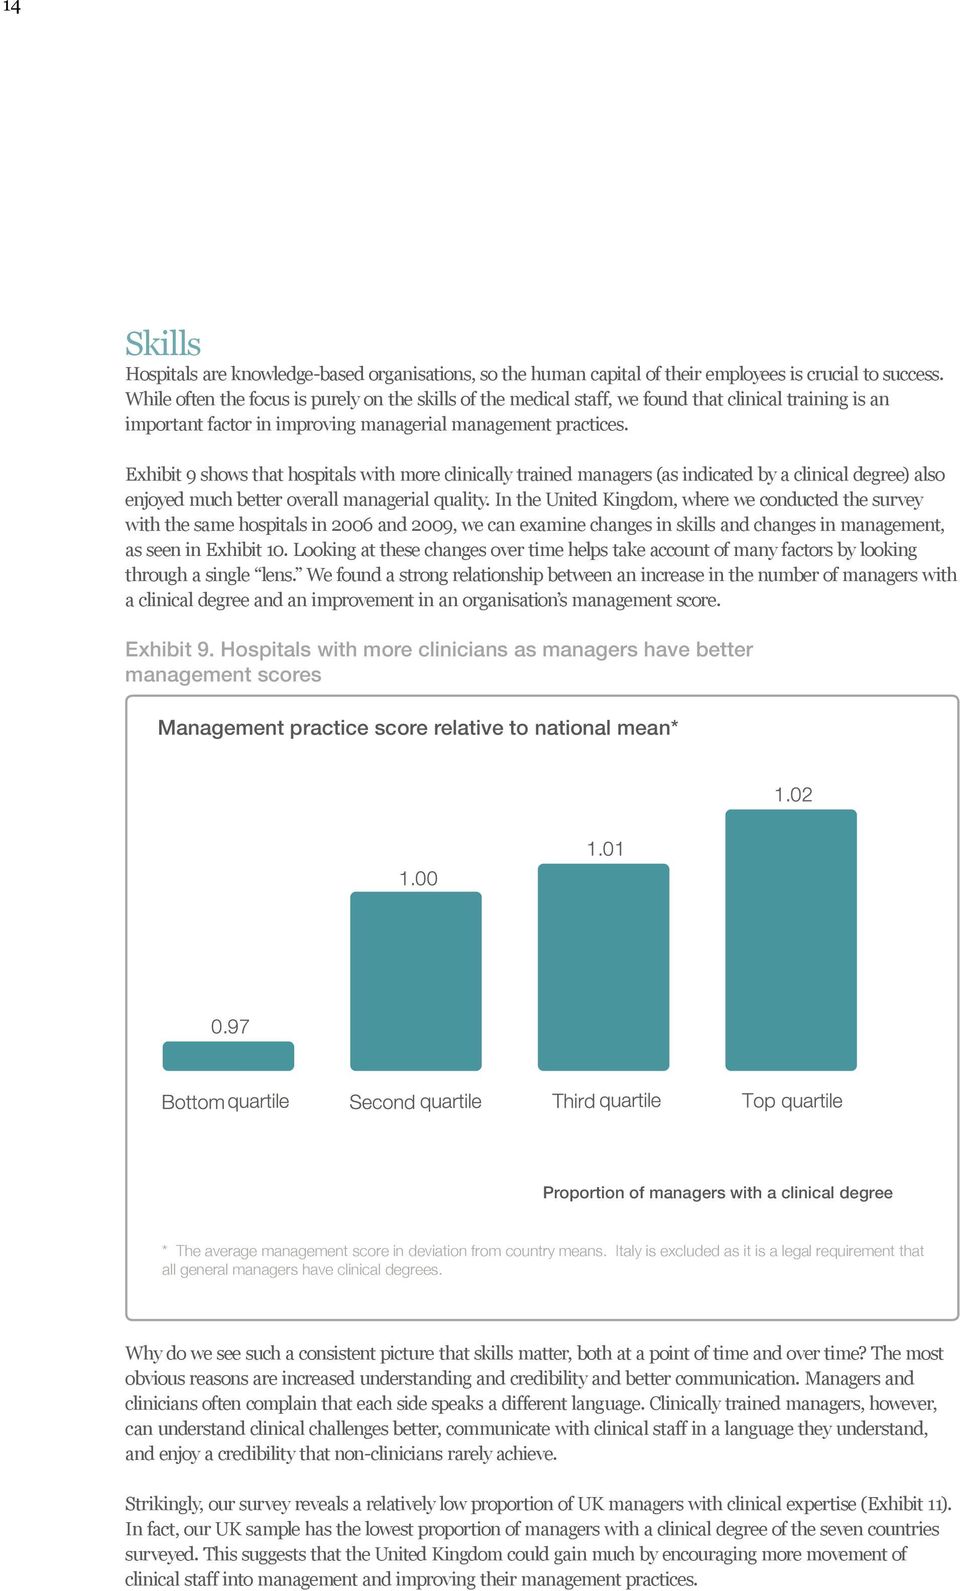 Exhibit 9 shows that hospitals with more clinically trained managers (as indicated by a clinical degree) also enjoyed much better overall managerial quality.